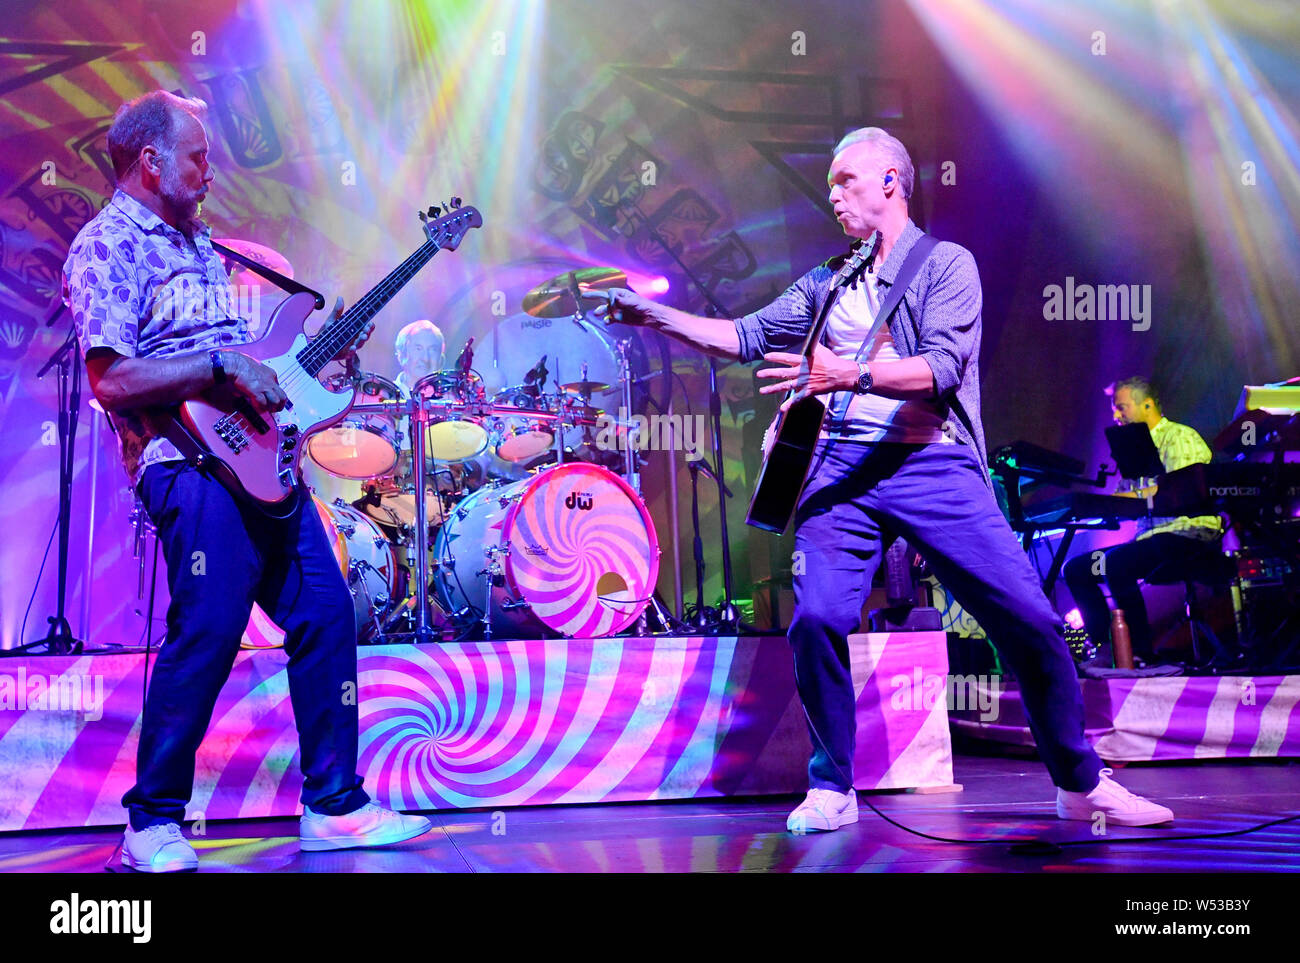 Prague, Czech Republic. 25th July, 2019. Guitarist Guy Pratt of Saucerful Of Secrets, the band led by Pink Floyd drummer Nick Mason (centre), perform in Lucerna Hall, Prague, Czech Republic, on Thursday, July 25, 2019. On the front there are guitarists Guy Pratt, left, and Gary Kemp. Credit: Vit Simanek/CTK Photo/Alamy Live News Stock Photo